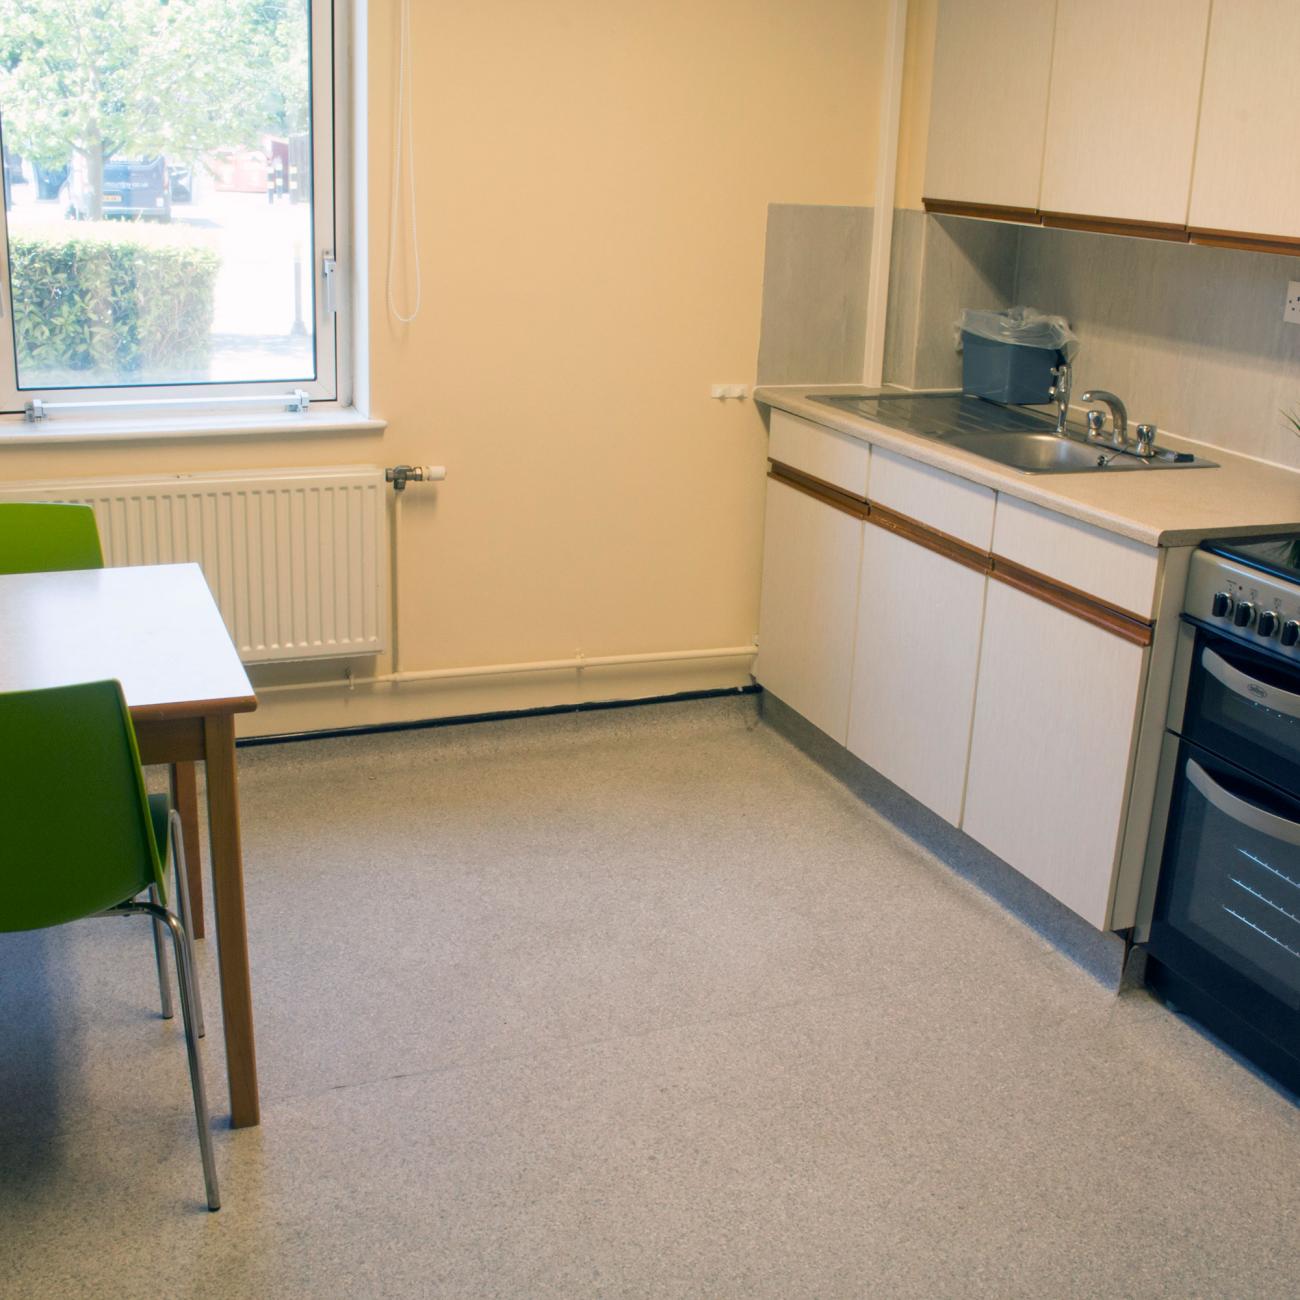 A large kitchen with laminate flooring. It contains modern looking kitchen appliances and cupboards, a small square table with two chairs and a window.